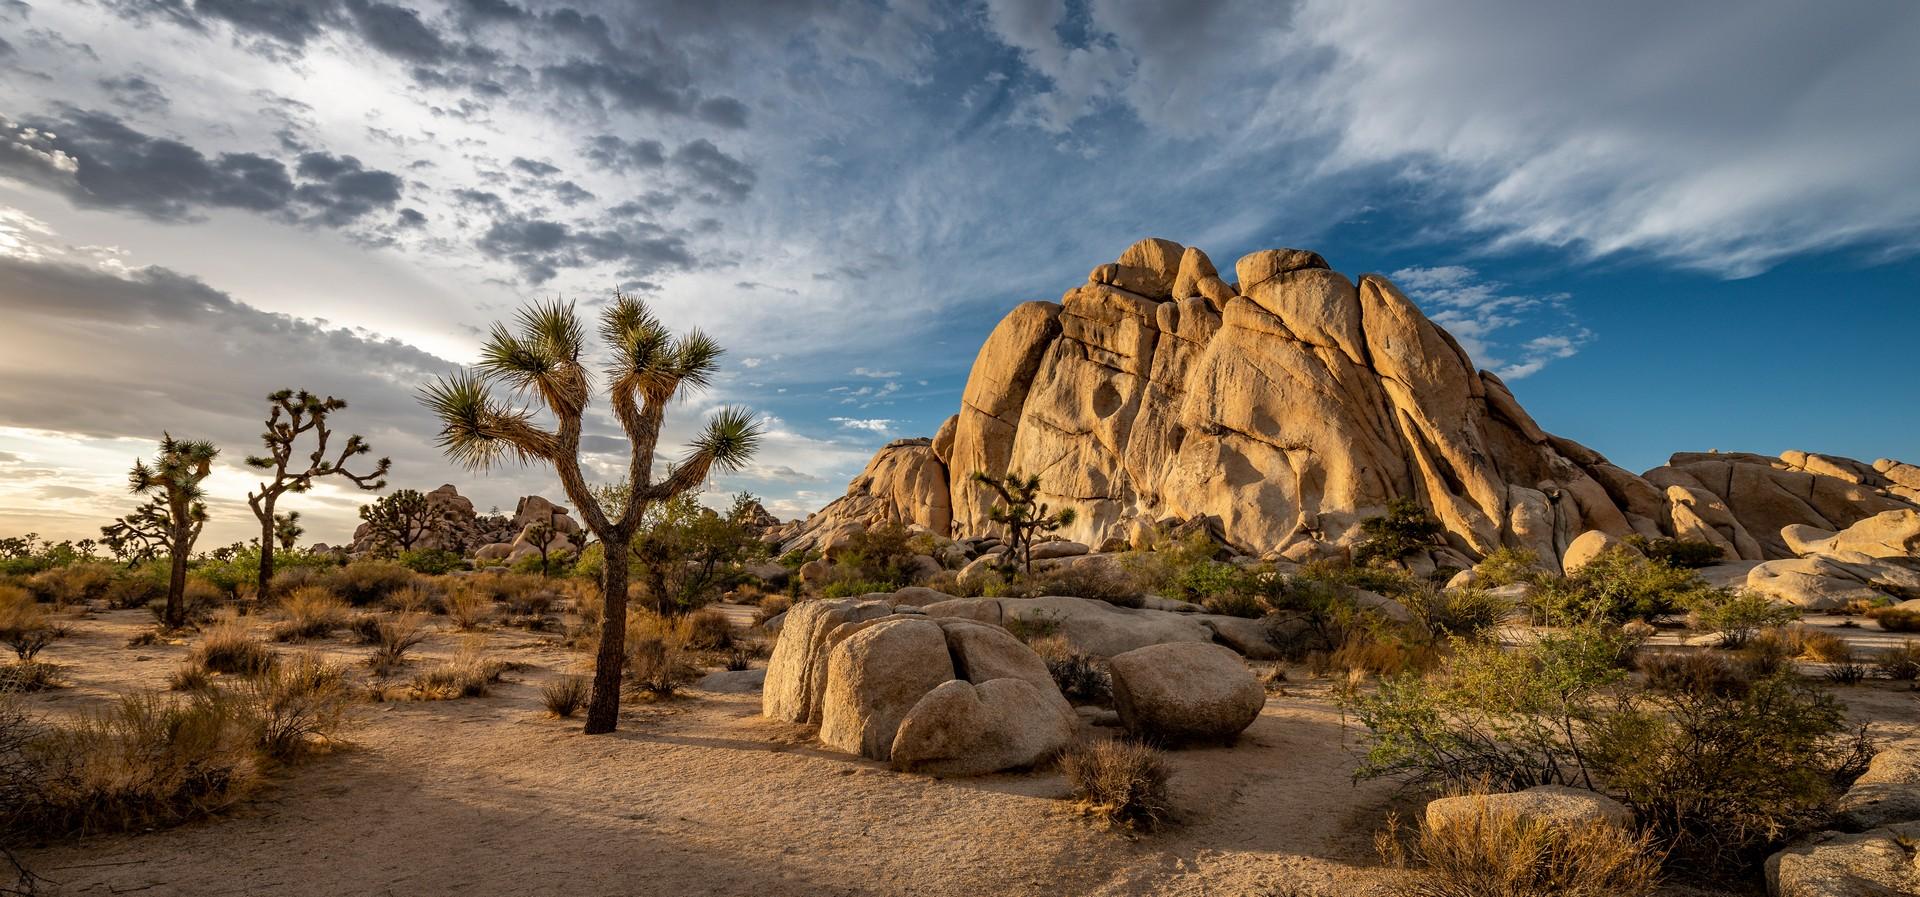 Joshua Tree National Park on a cloudy day